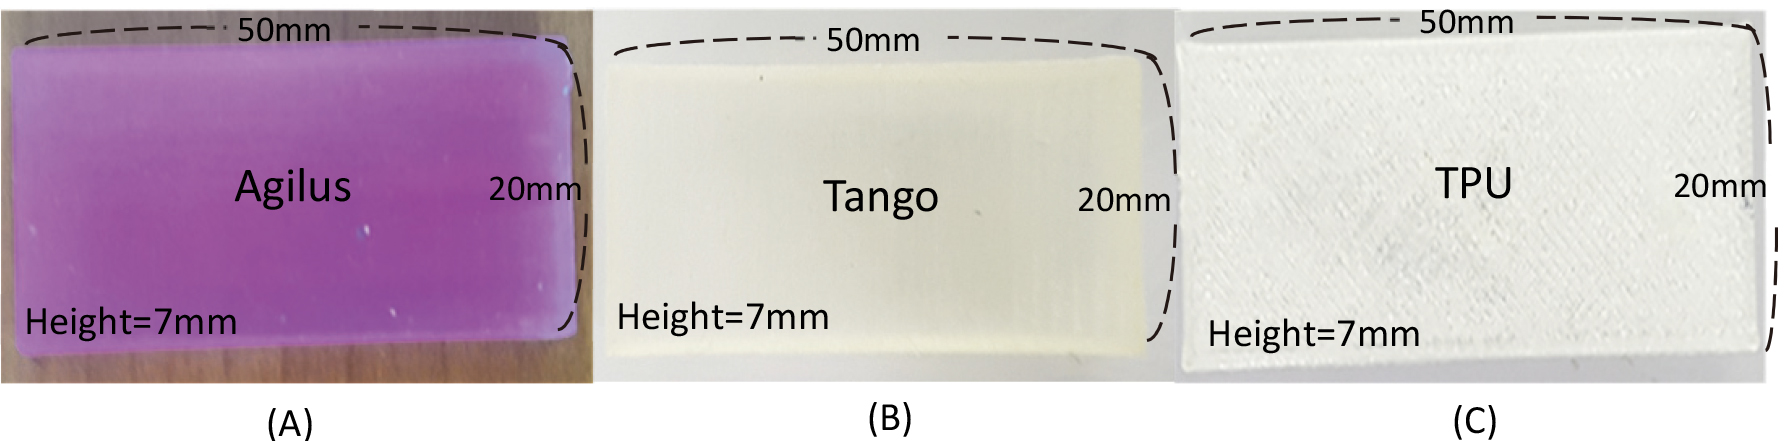 Agilus, Tango, and TPU sample (A) Agilus sample are 50 mm wide, 20 mm long, and 7 mm height (B) Tango sample are 50 mm wide, 20 mm long, 7 mm height (C) TPU sample are 50 mm wide, 20 mm long, and height 7 mm.